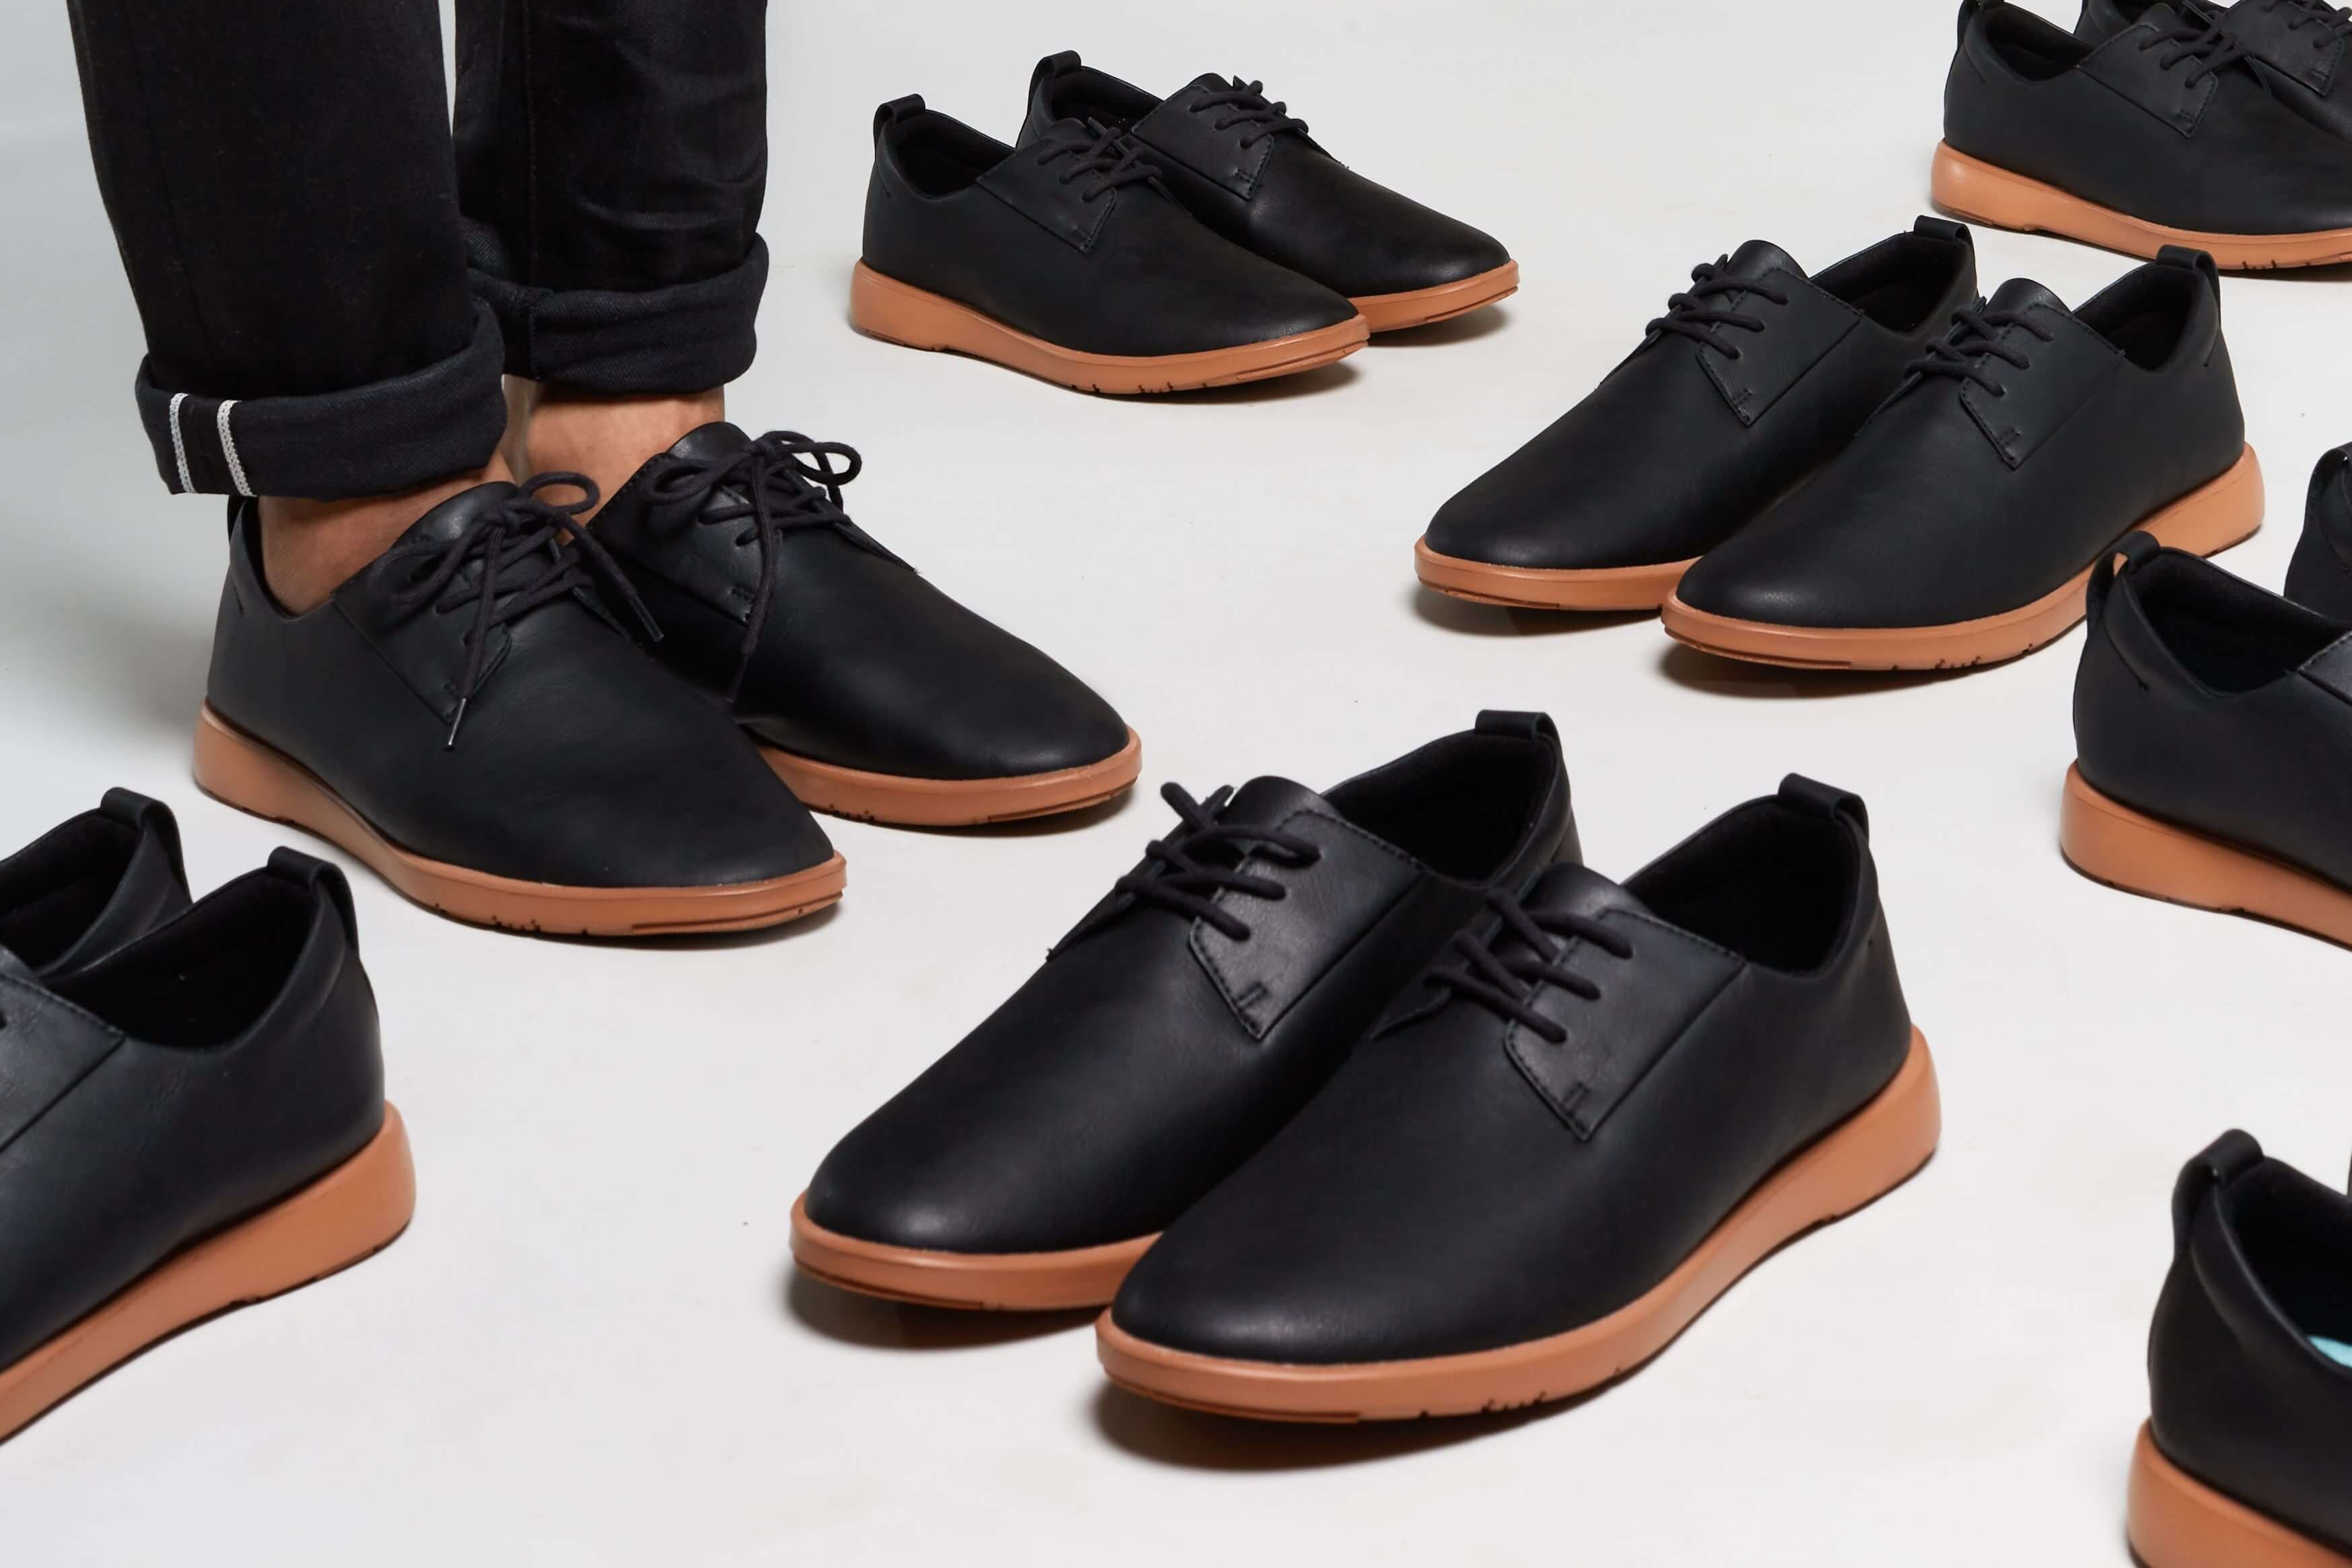 Top more than 75 dress shoes like sneakers super hot